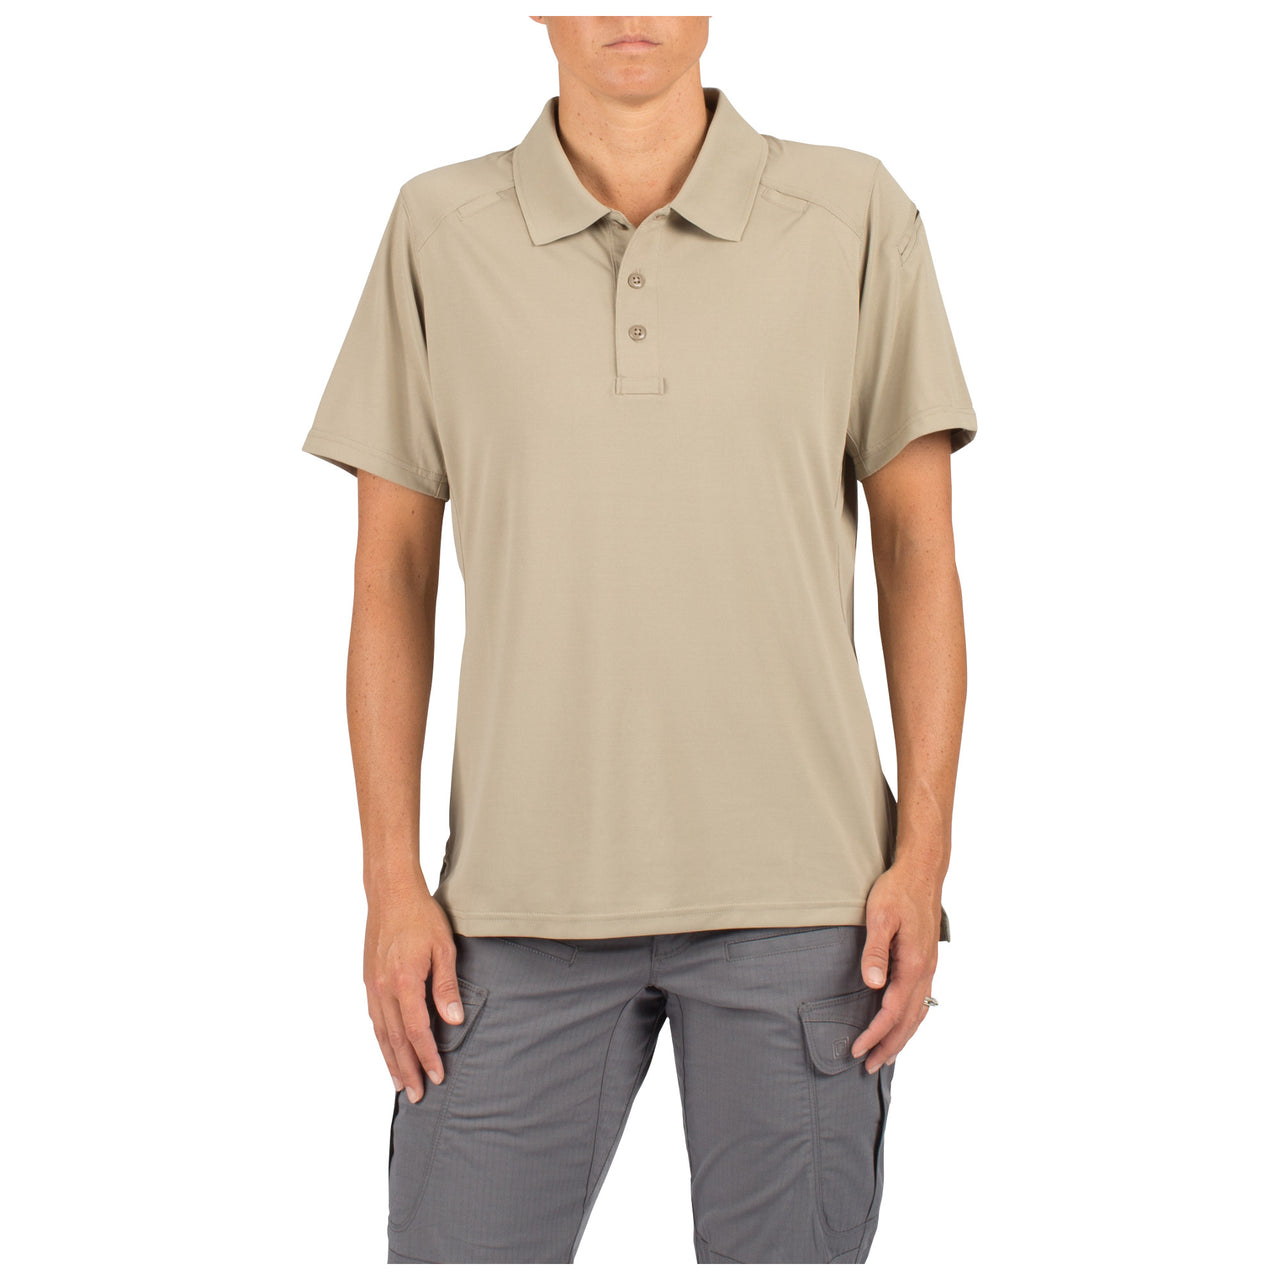 5.11 Tactical Women’s Helios Short Sleeve Polo (61305) | The Fire Center | Fuego Fire Center | FIREFIGHTER GEAR | Designed for comfort in hot, sticky weather, the Helios Polo is crafted from snag- resistant jersey knit fabric that offers moisture- wicking, quick- drying, and odor control characteristics to keep you cool, crisp, and fresh at all times